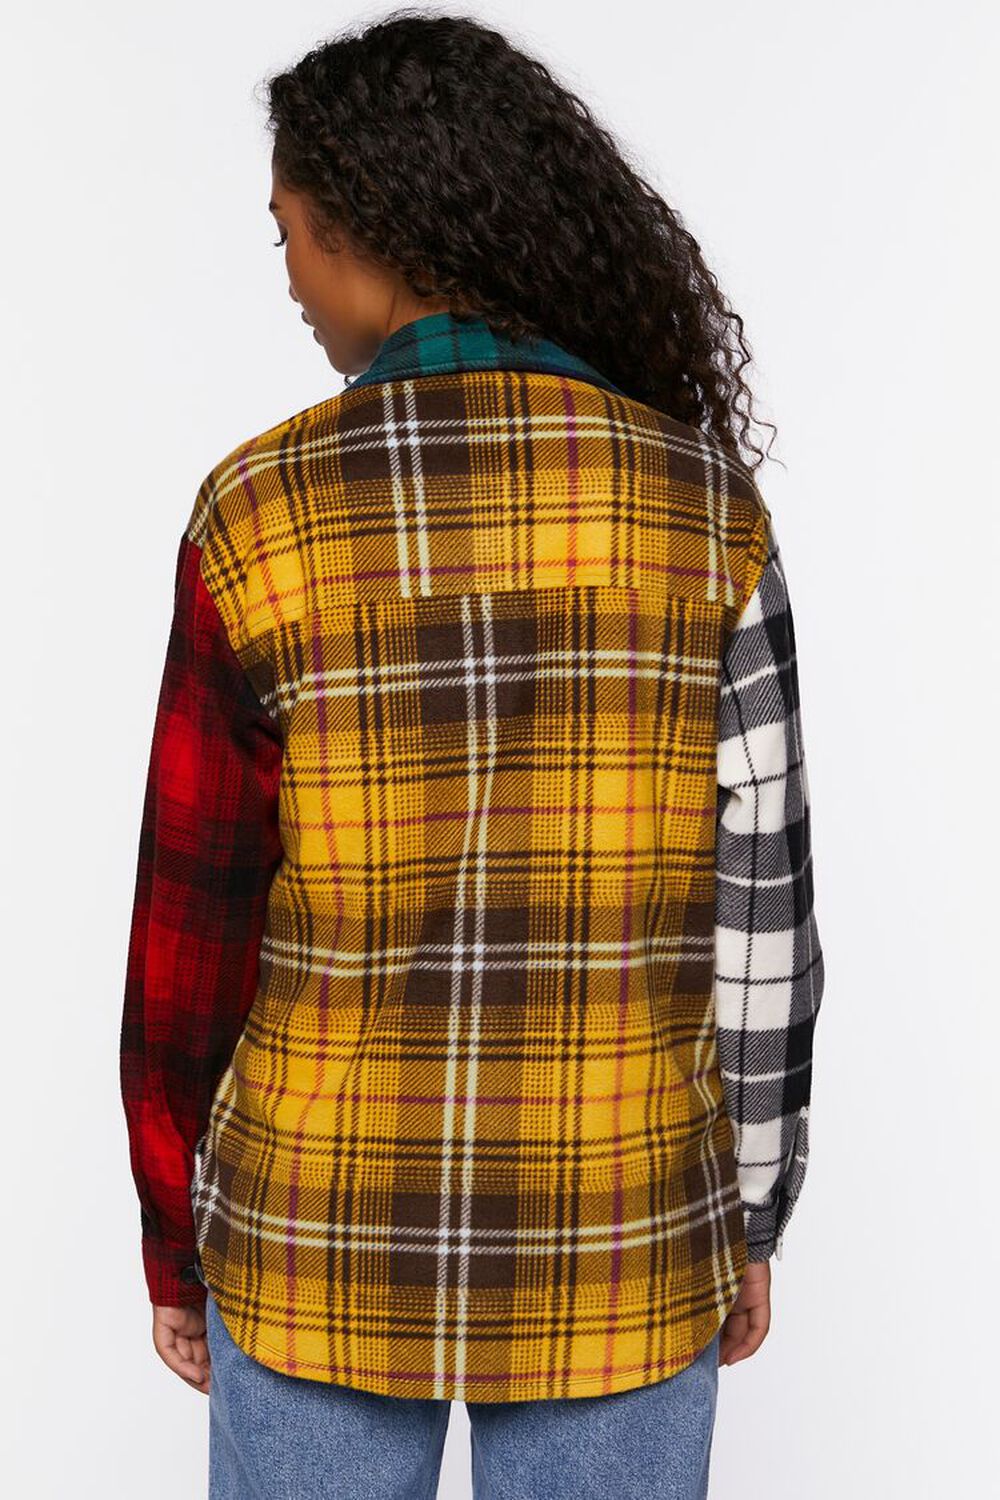 BLUE/MULTI Reworked Mixed Plaid Flannel Shirt, image 3